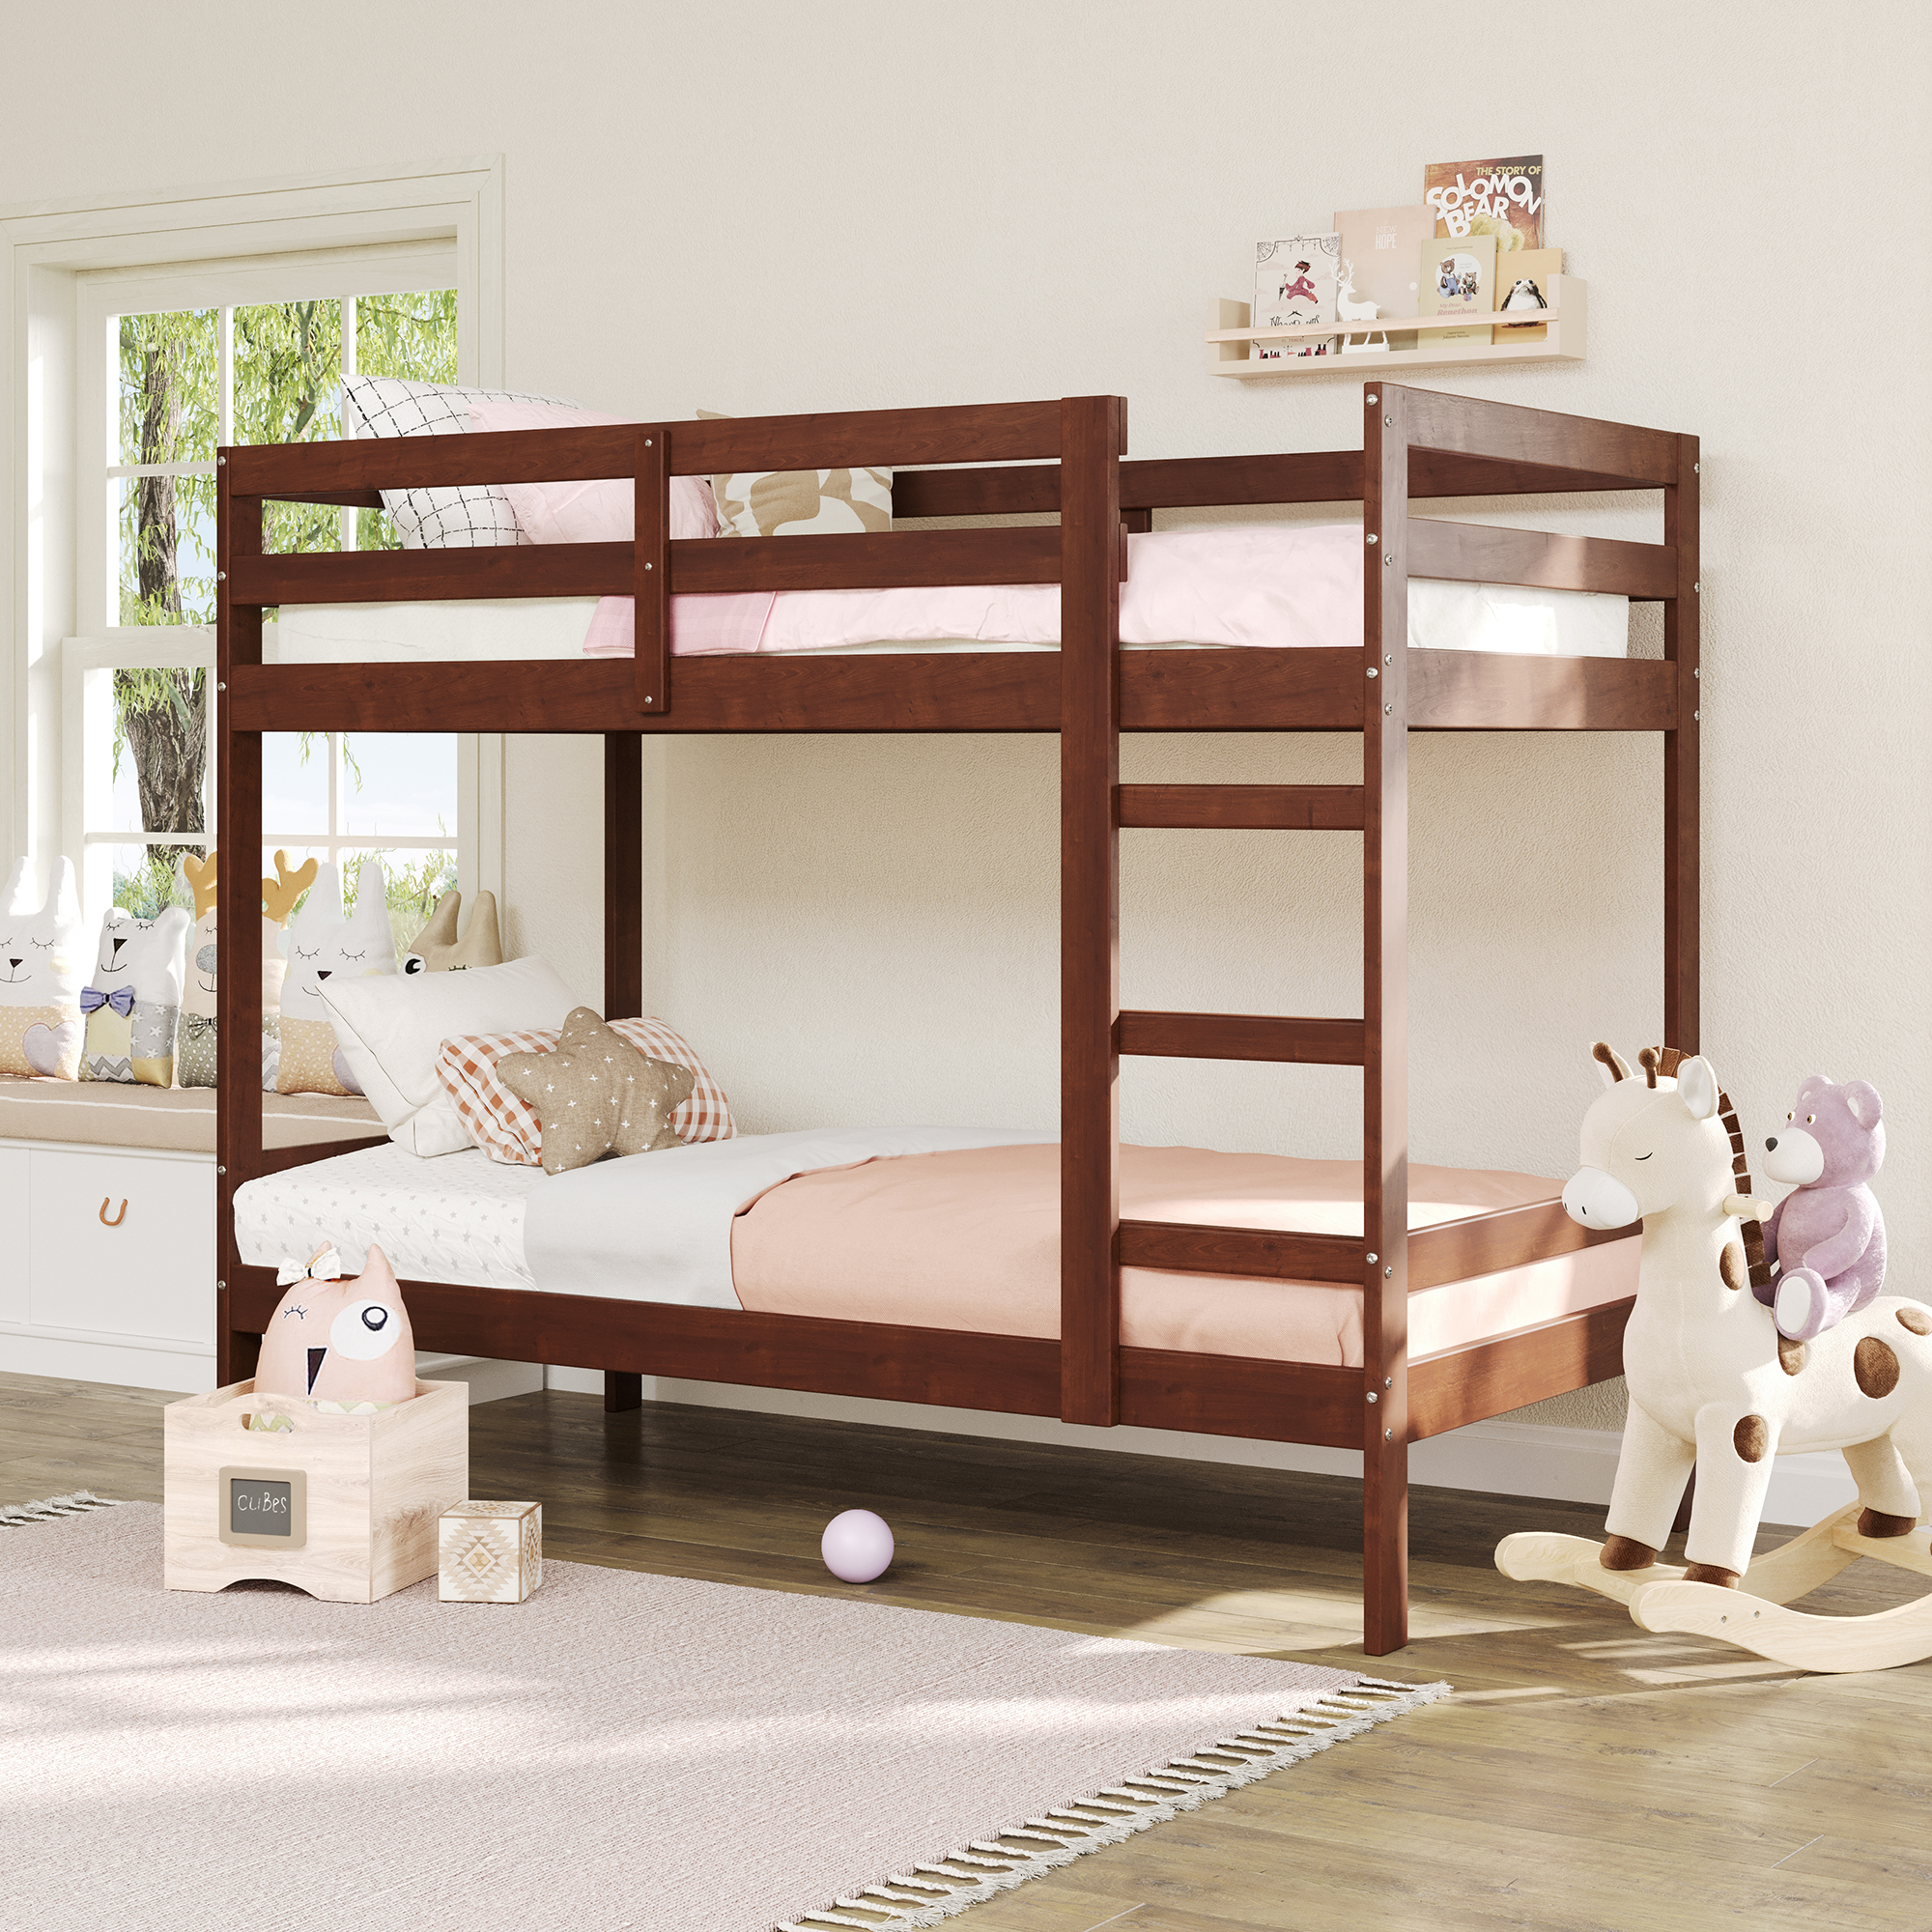 Walker Edison Modern Solid Wood Twin over Twin Bunkbed, Espresso - image 3 of 15